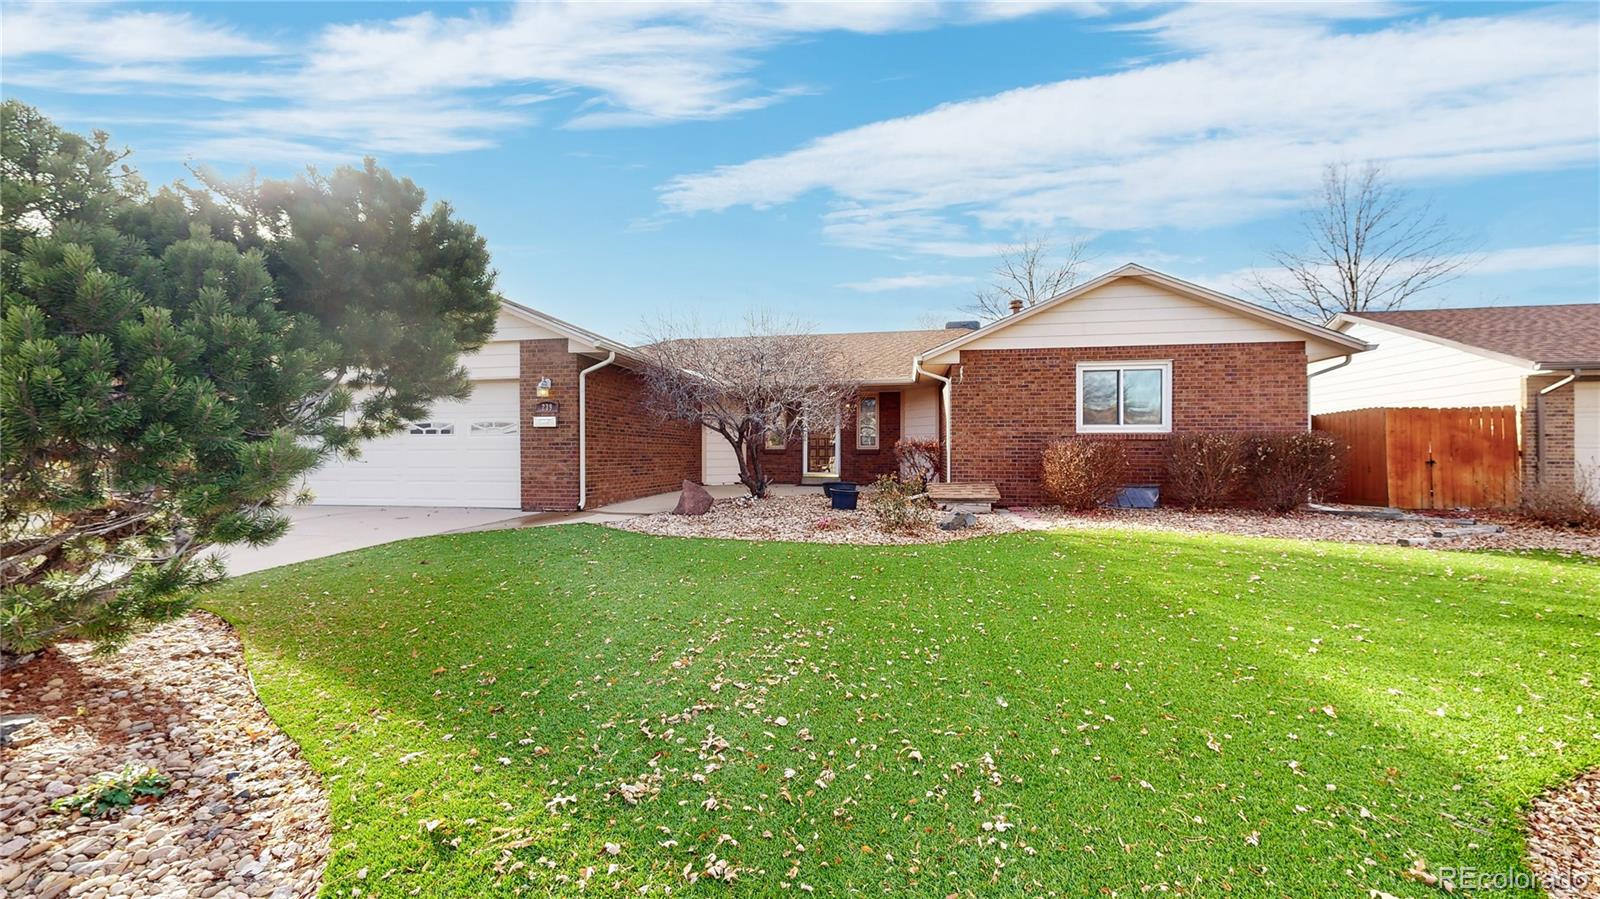 Report Image for 239 S 21st Place,Brighton, Colorado